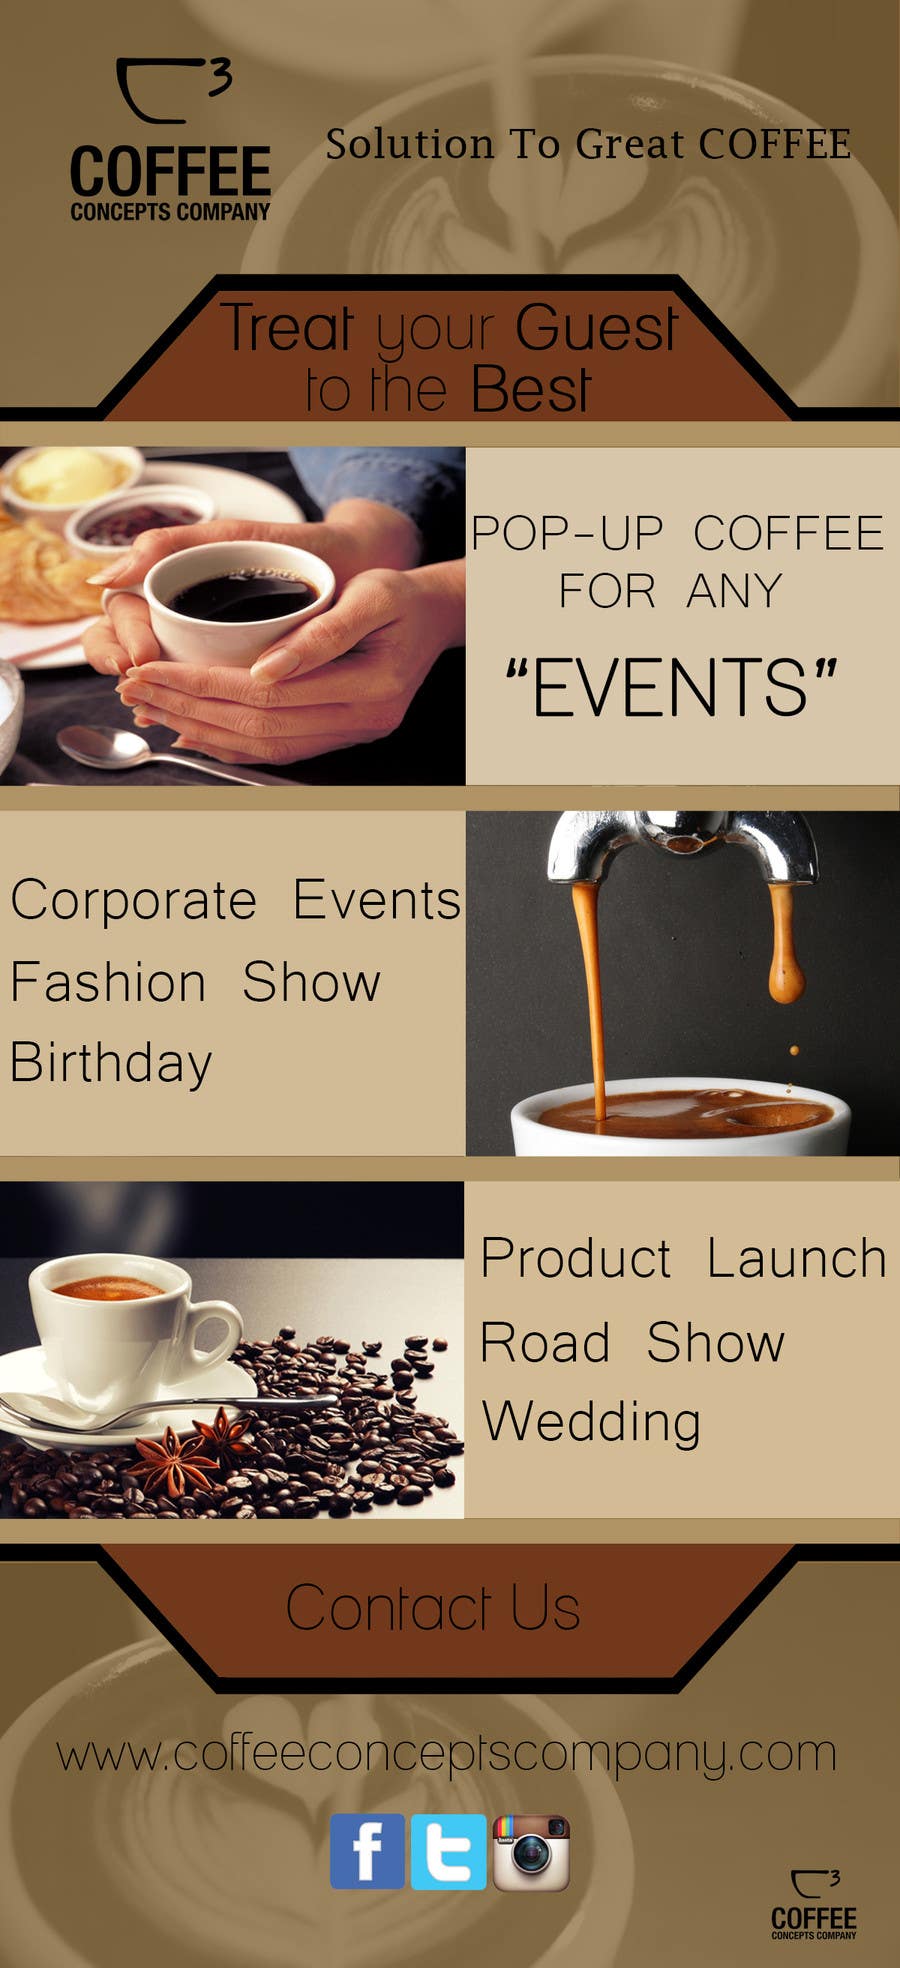 Contest Entry #16 for                                                 Design a Pull Up Banner for a Coffee Business
                                            